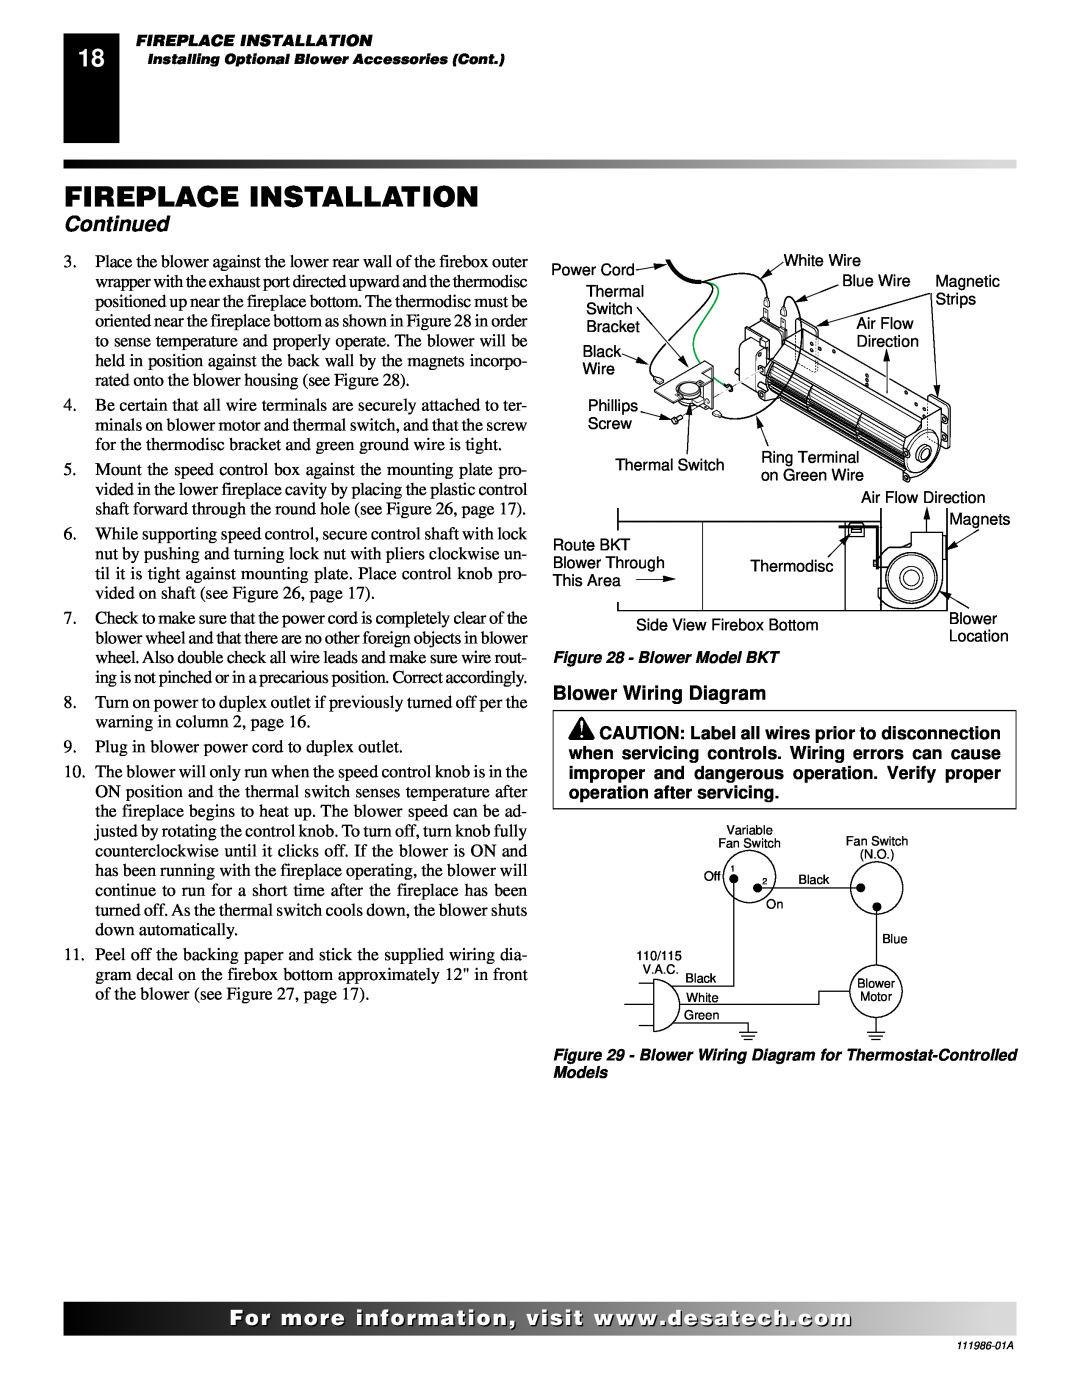 Desa T32P, T32N installation manual Blower Wiring Diagram, Fireplace Installation, Continued, For..com 